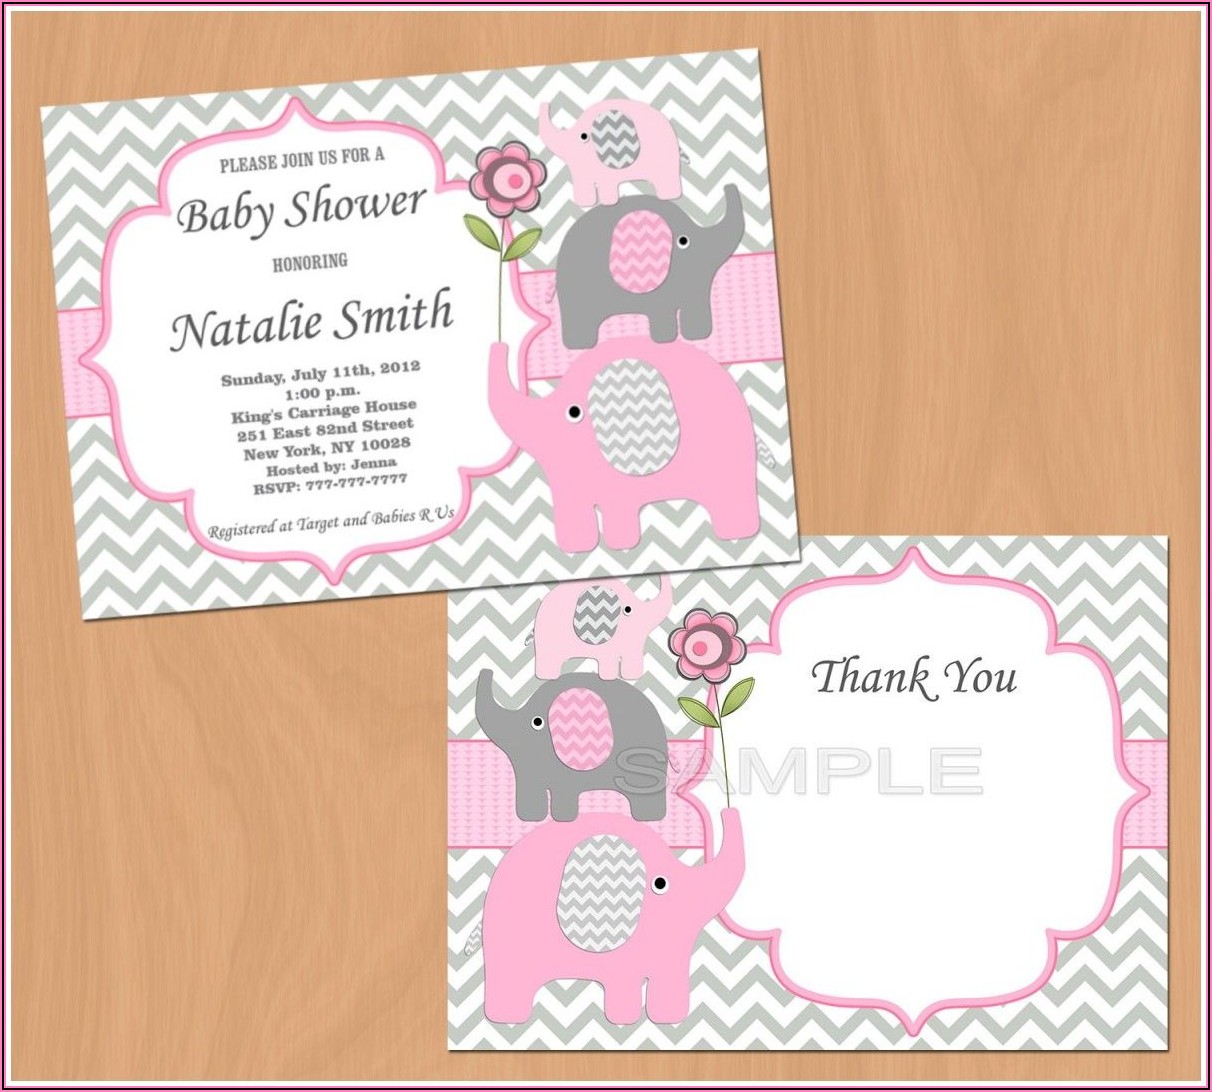 Create Your Own Baby Shower Invitations Online Free